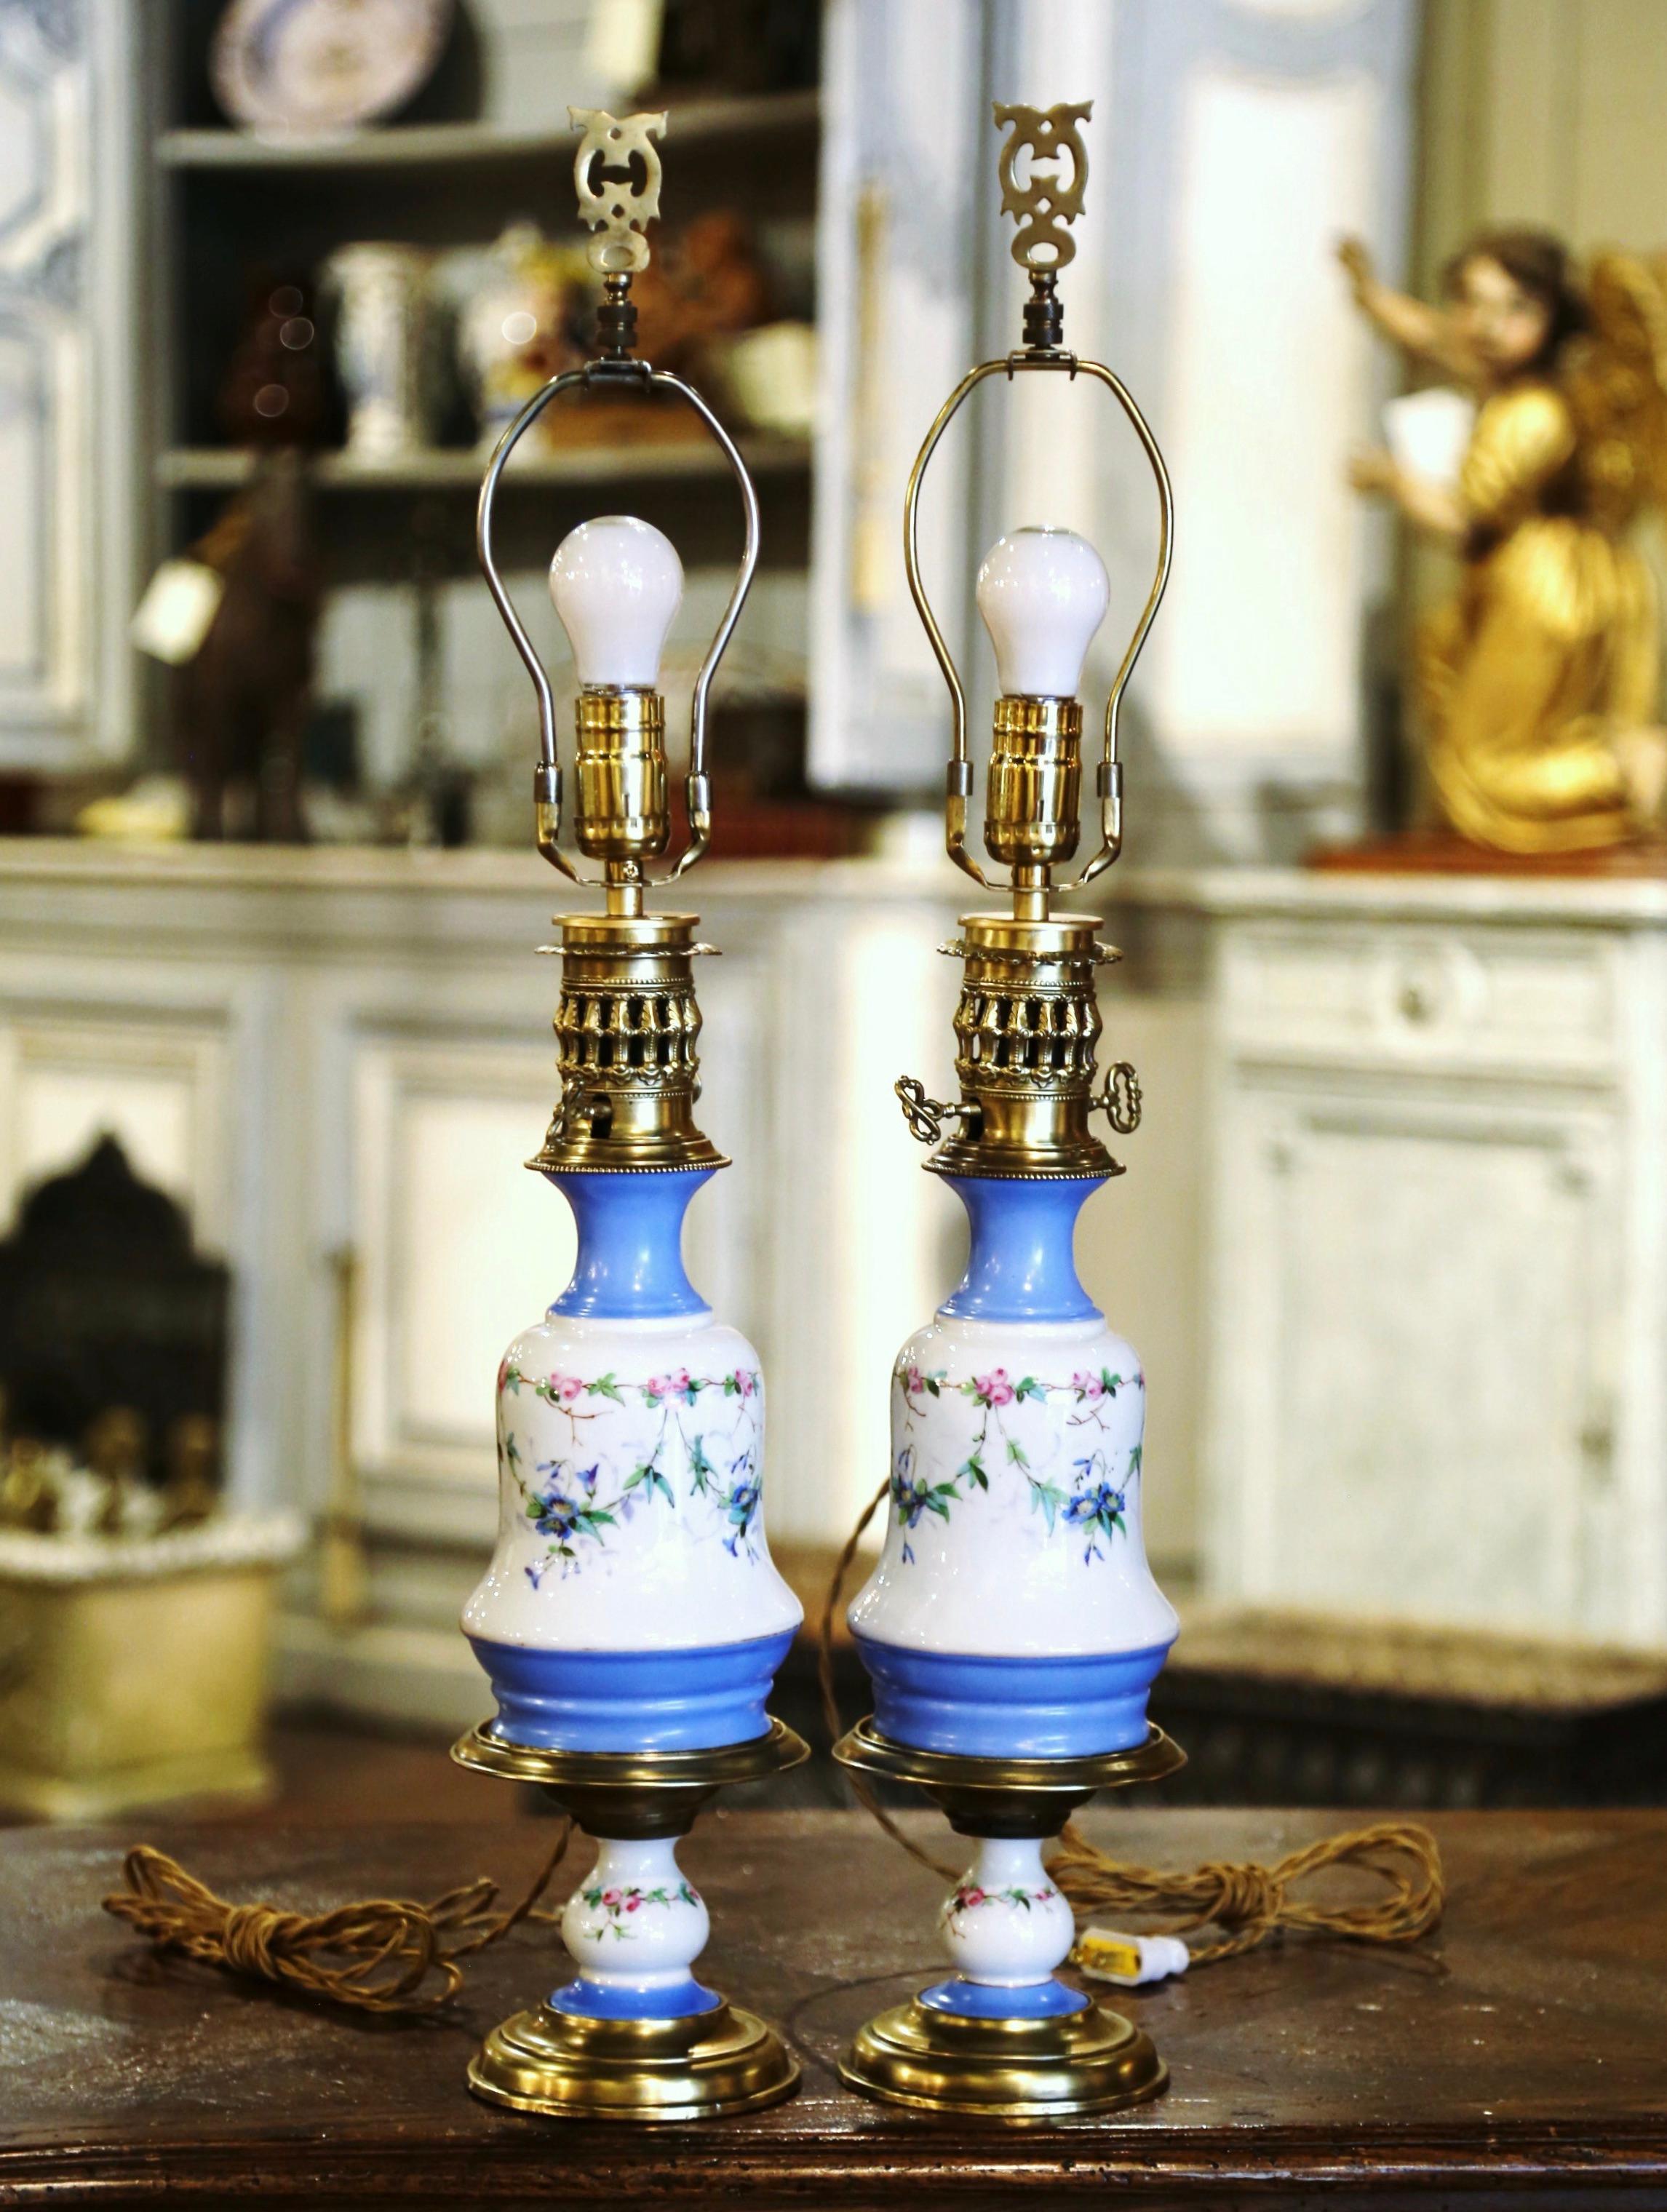 Pair of 19th Century French Porcelain & Brass Table Oil Lamps with Floral Motif For Sale 4